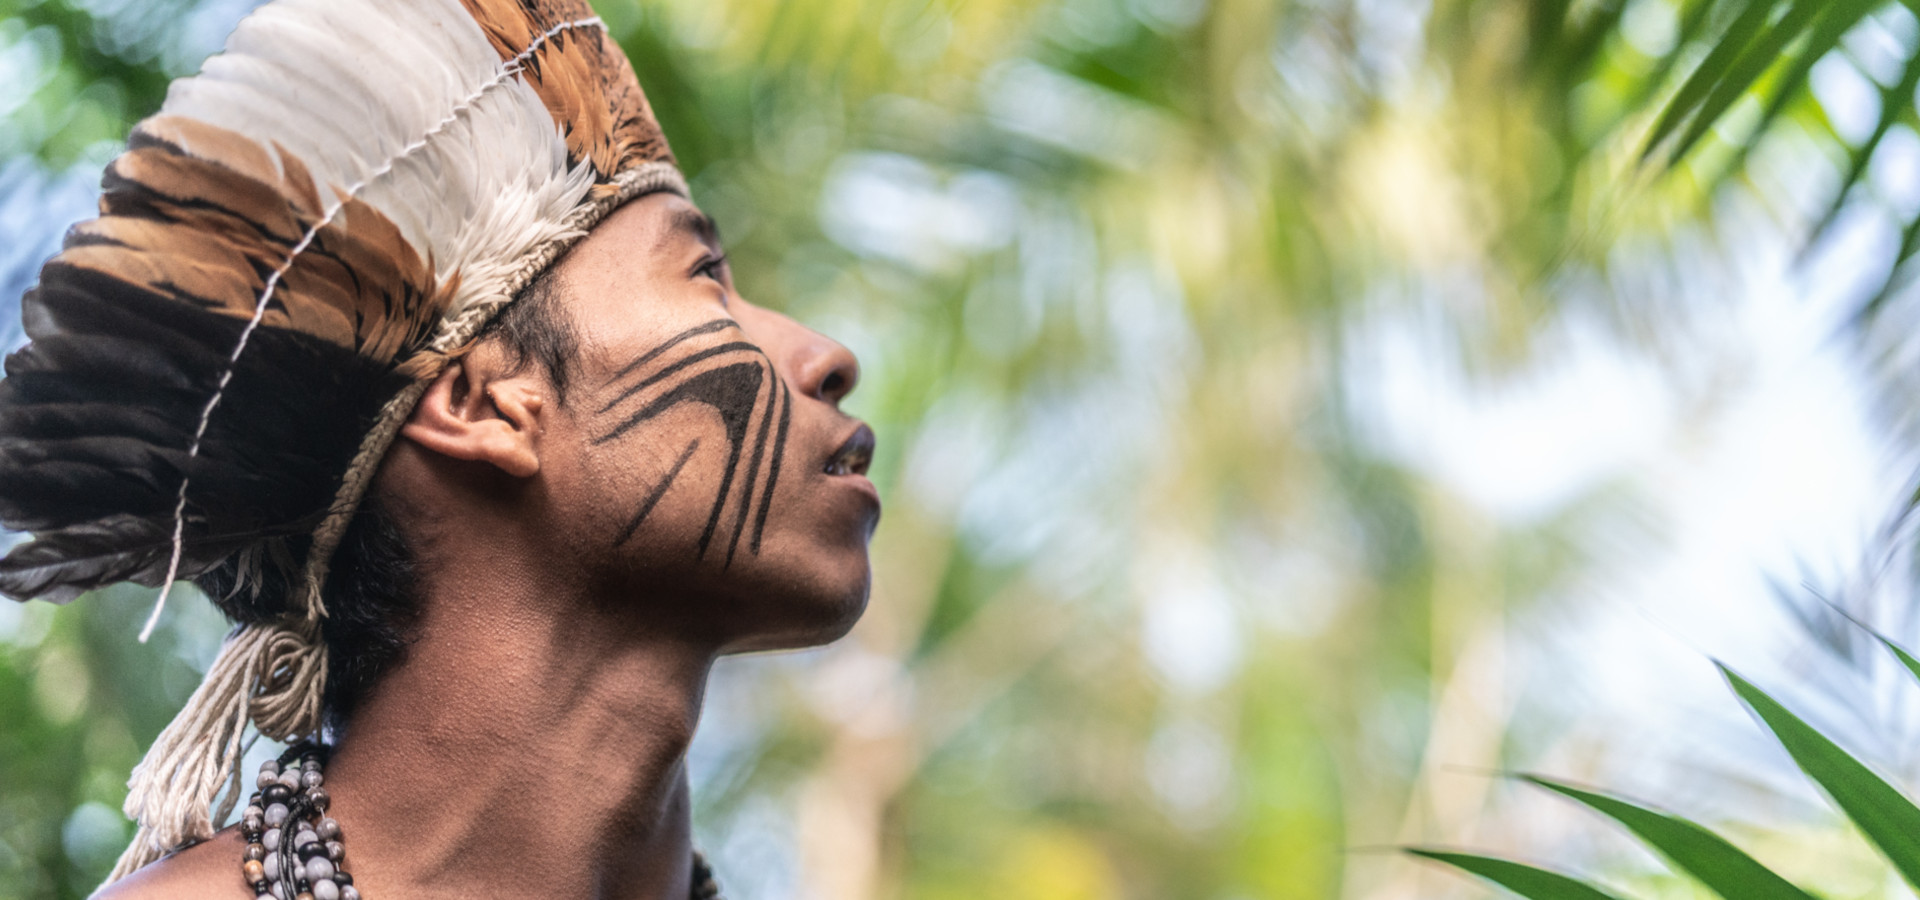 Portrait of a young indigenous Guaraní person in the jungle of Brazil